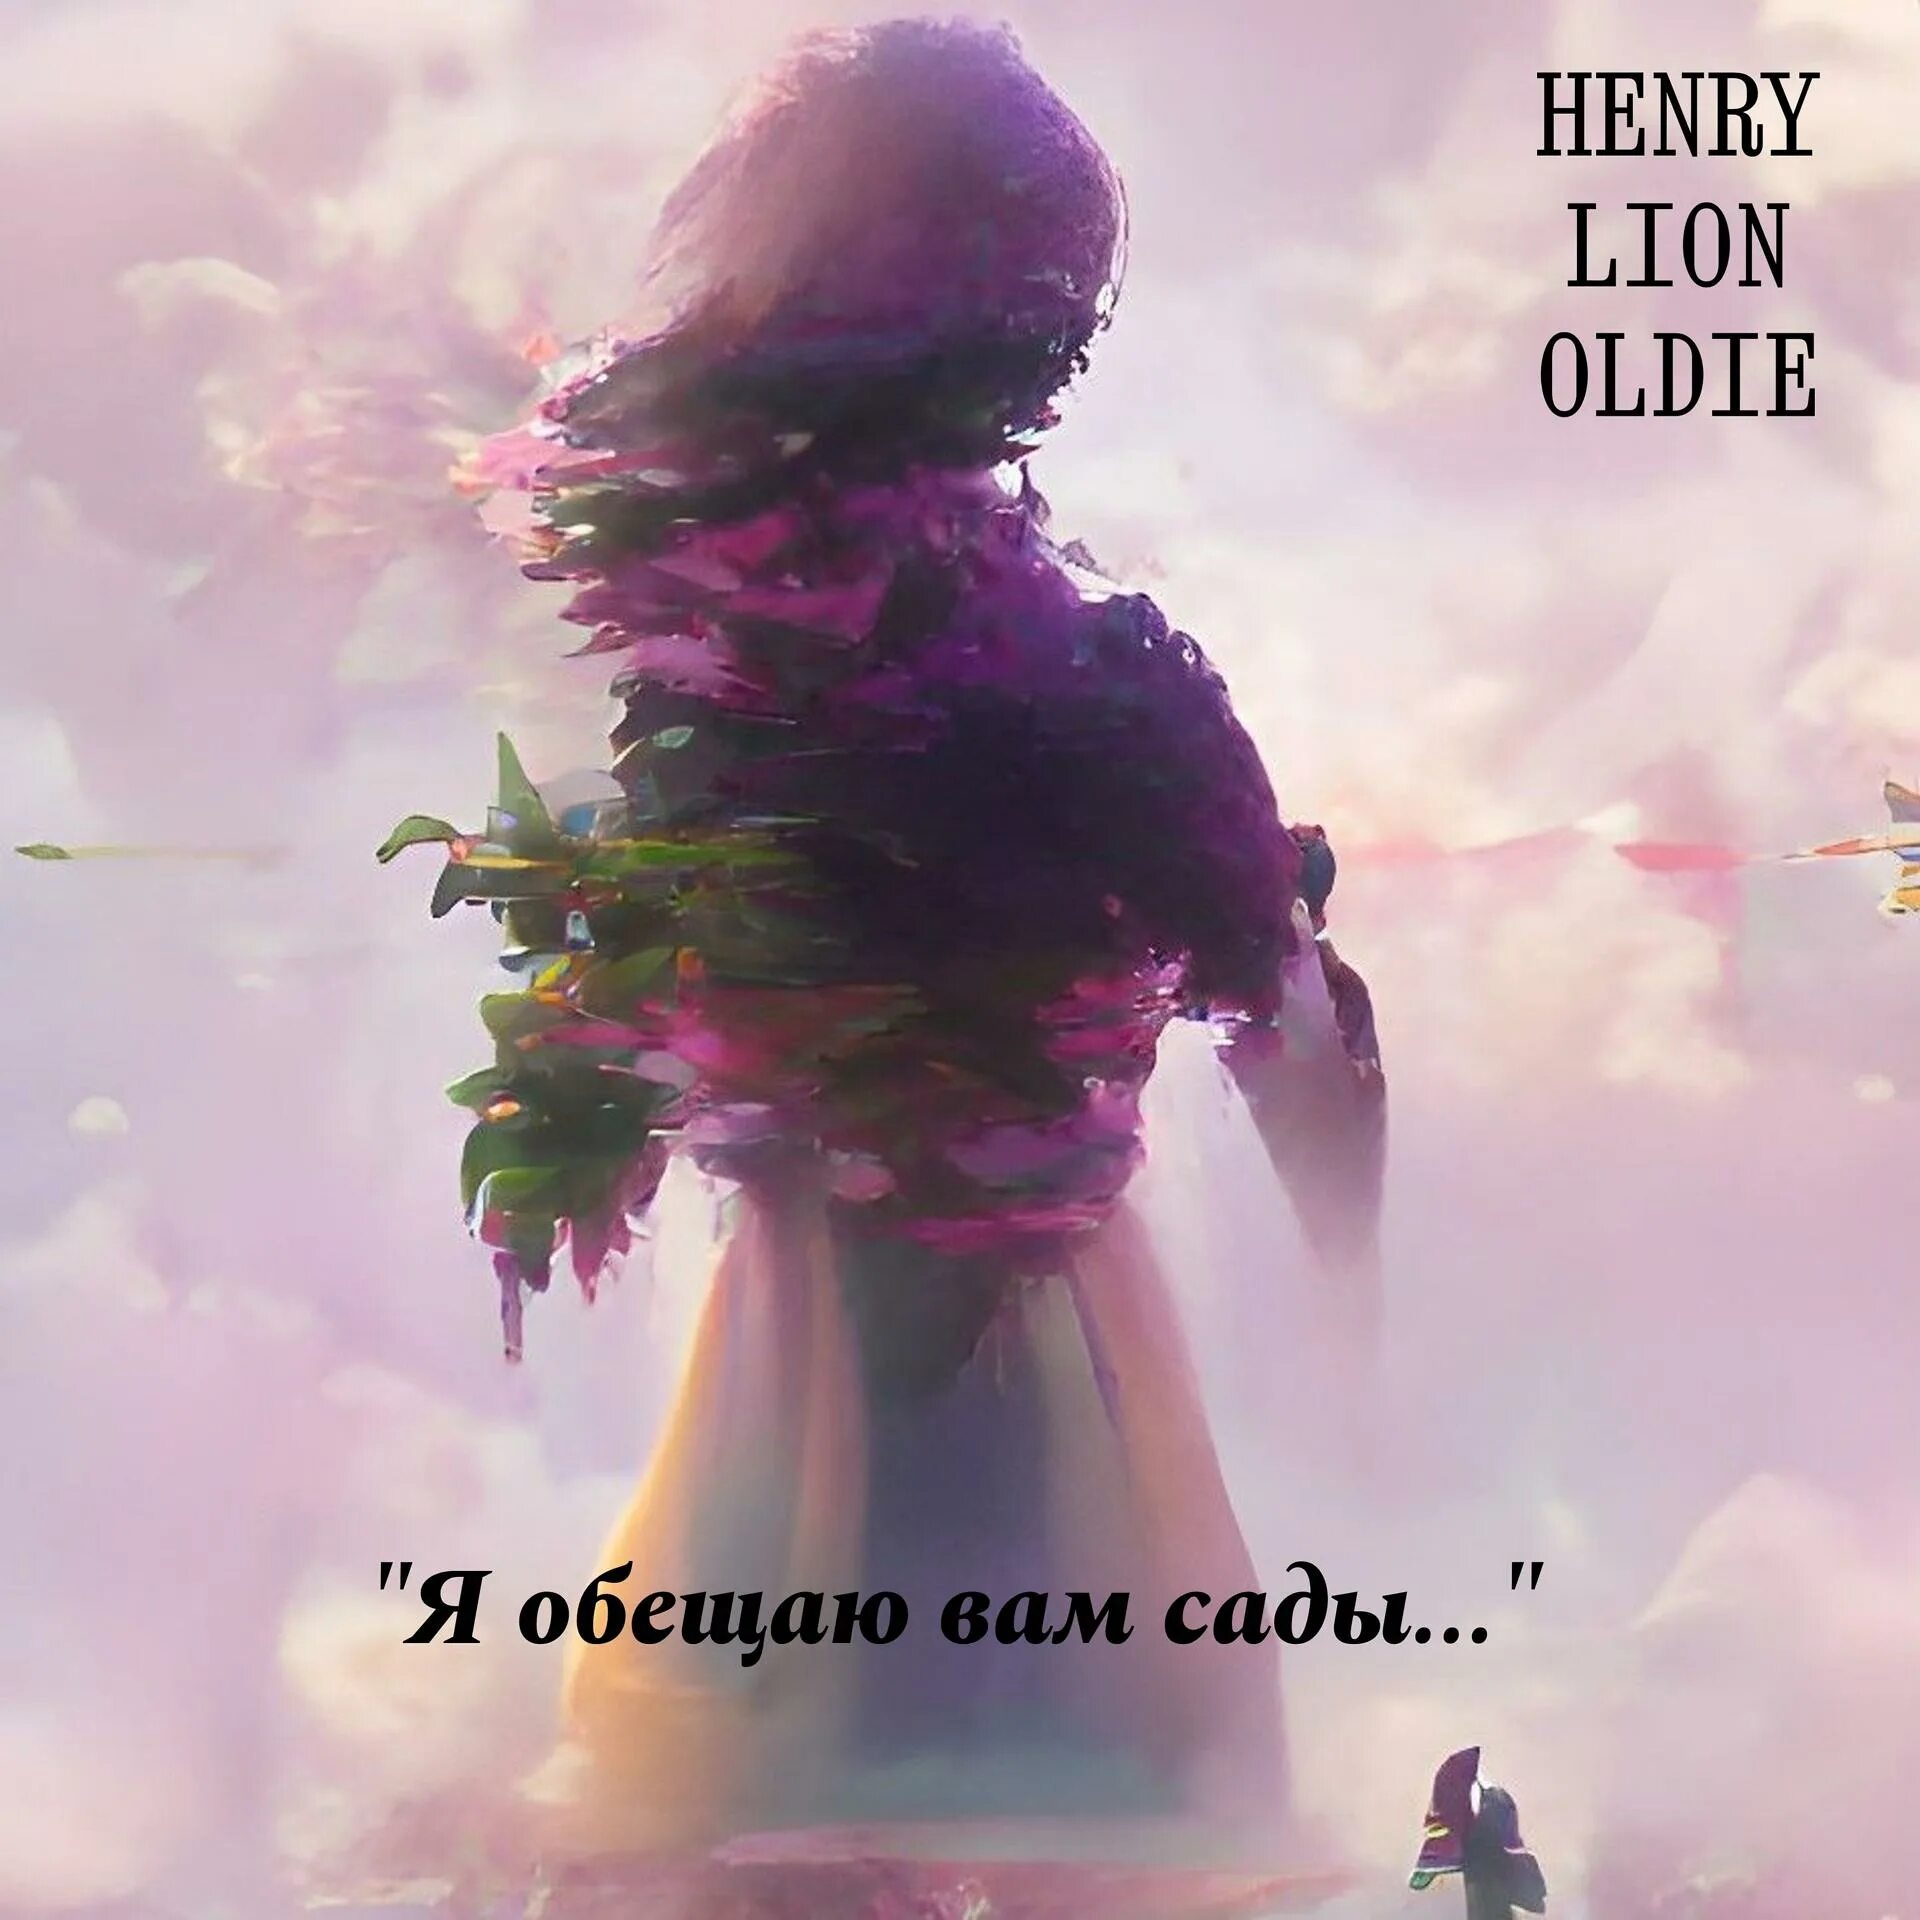 Henry_Lion_Oldie_the_Hero_must_be_Alone. Стареем братишка стареем